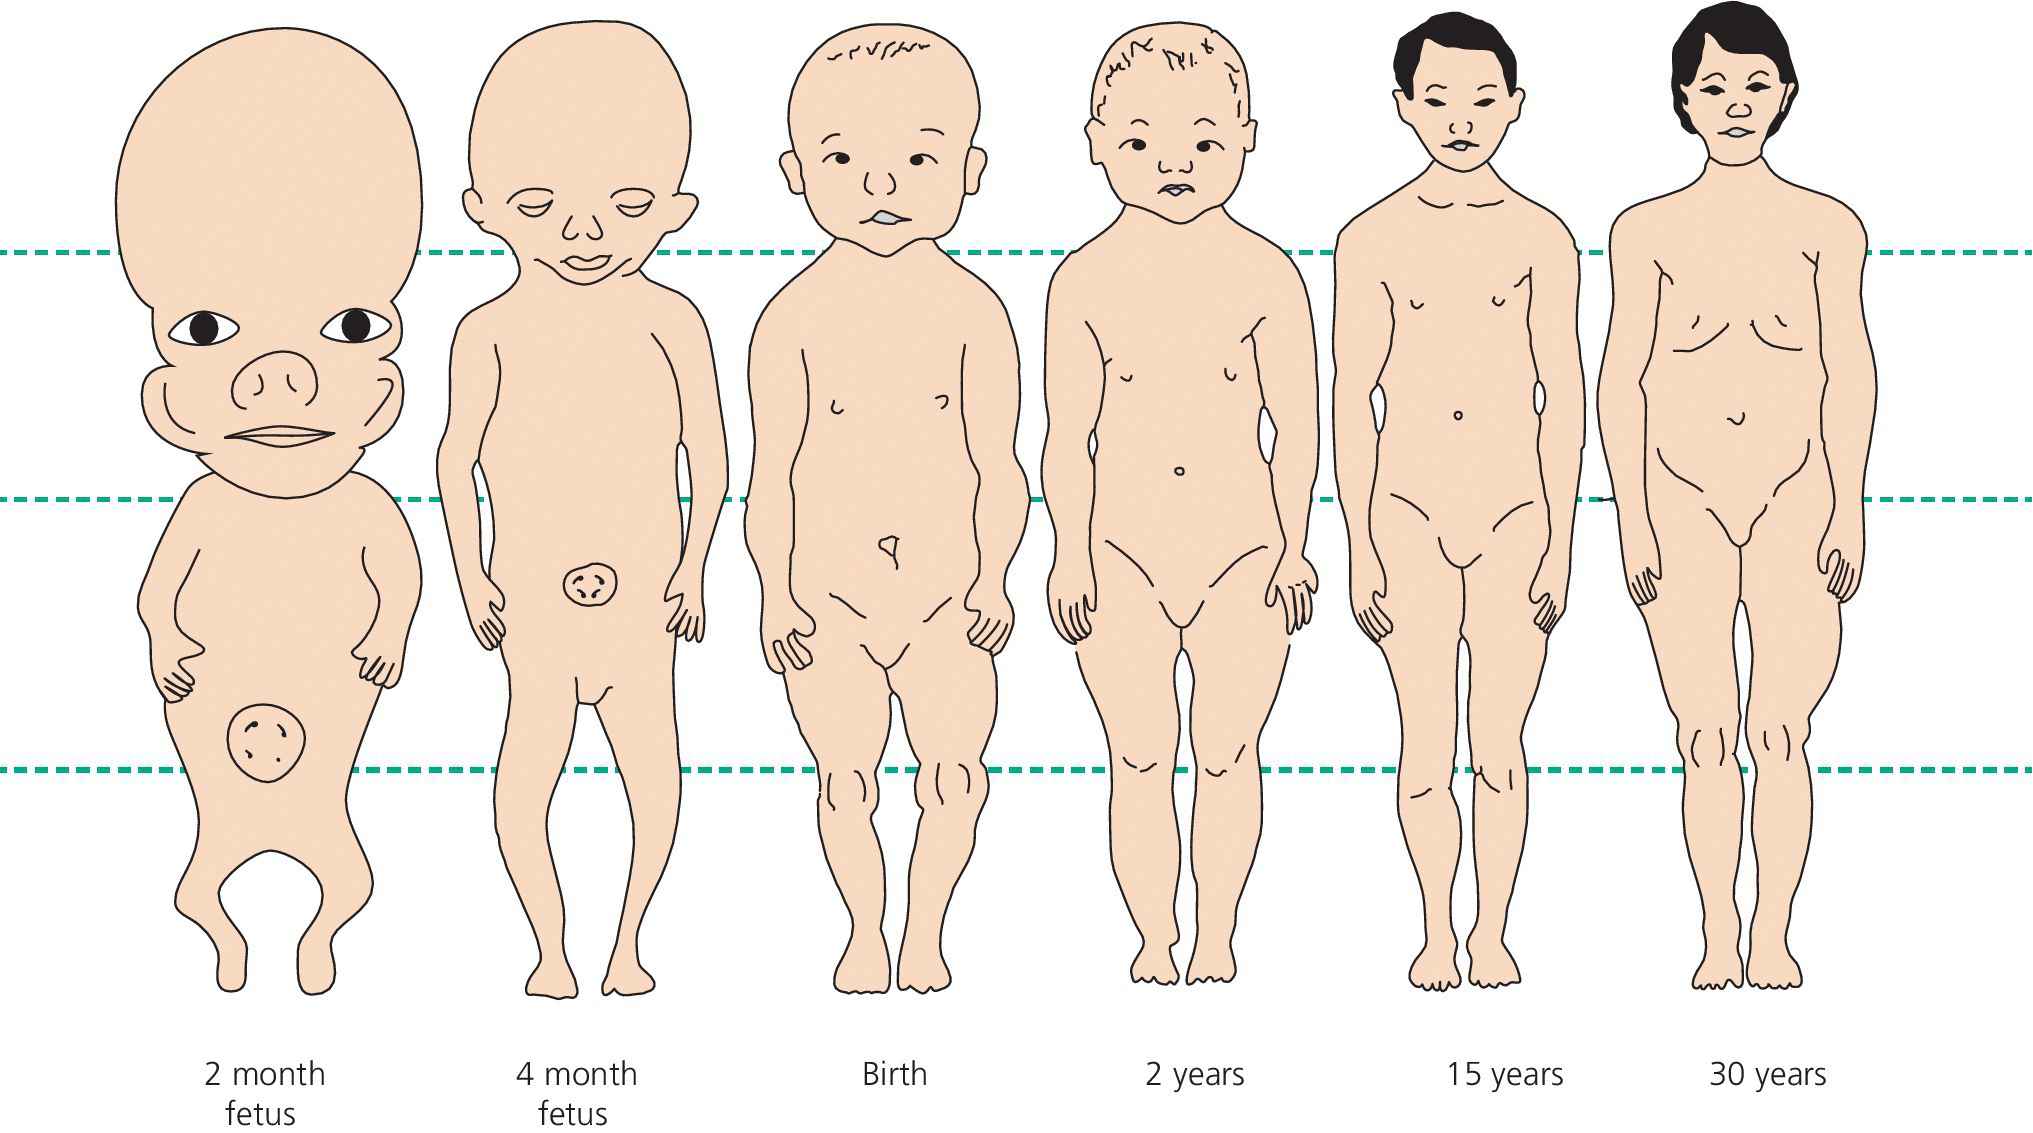 Illustration of the changes in human body proportions during development and growth. It features a human at 2 months, at 4 months, at birth, at 2 years, at 15 years, and at 30 years.